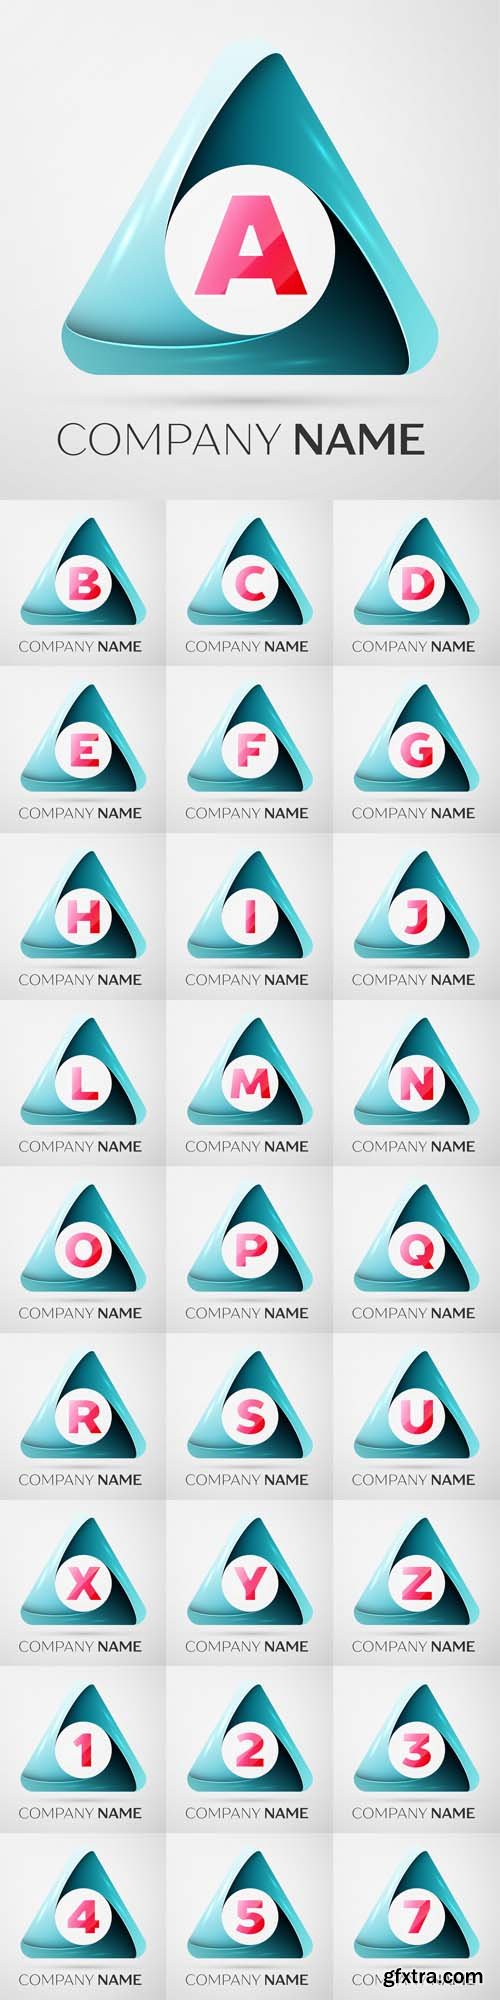 Vector Set - Letters and Numbers logo symbol in the colorful triangle on grey background